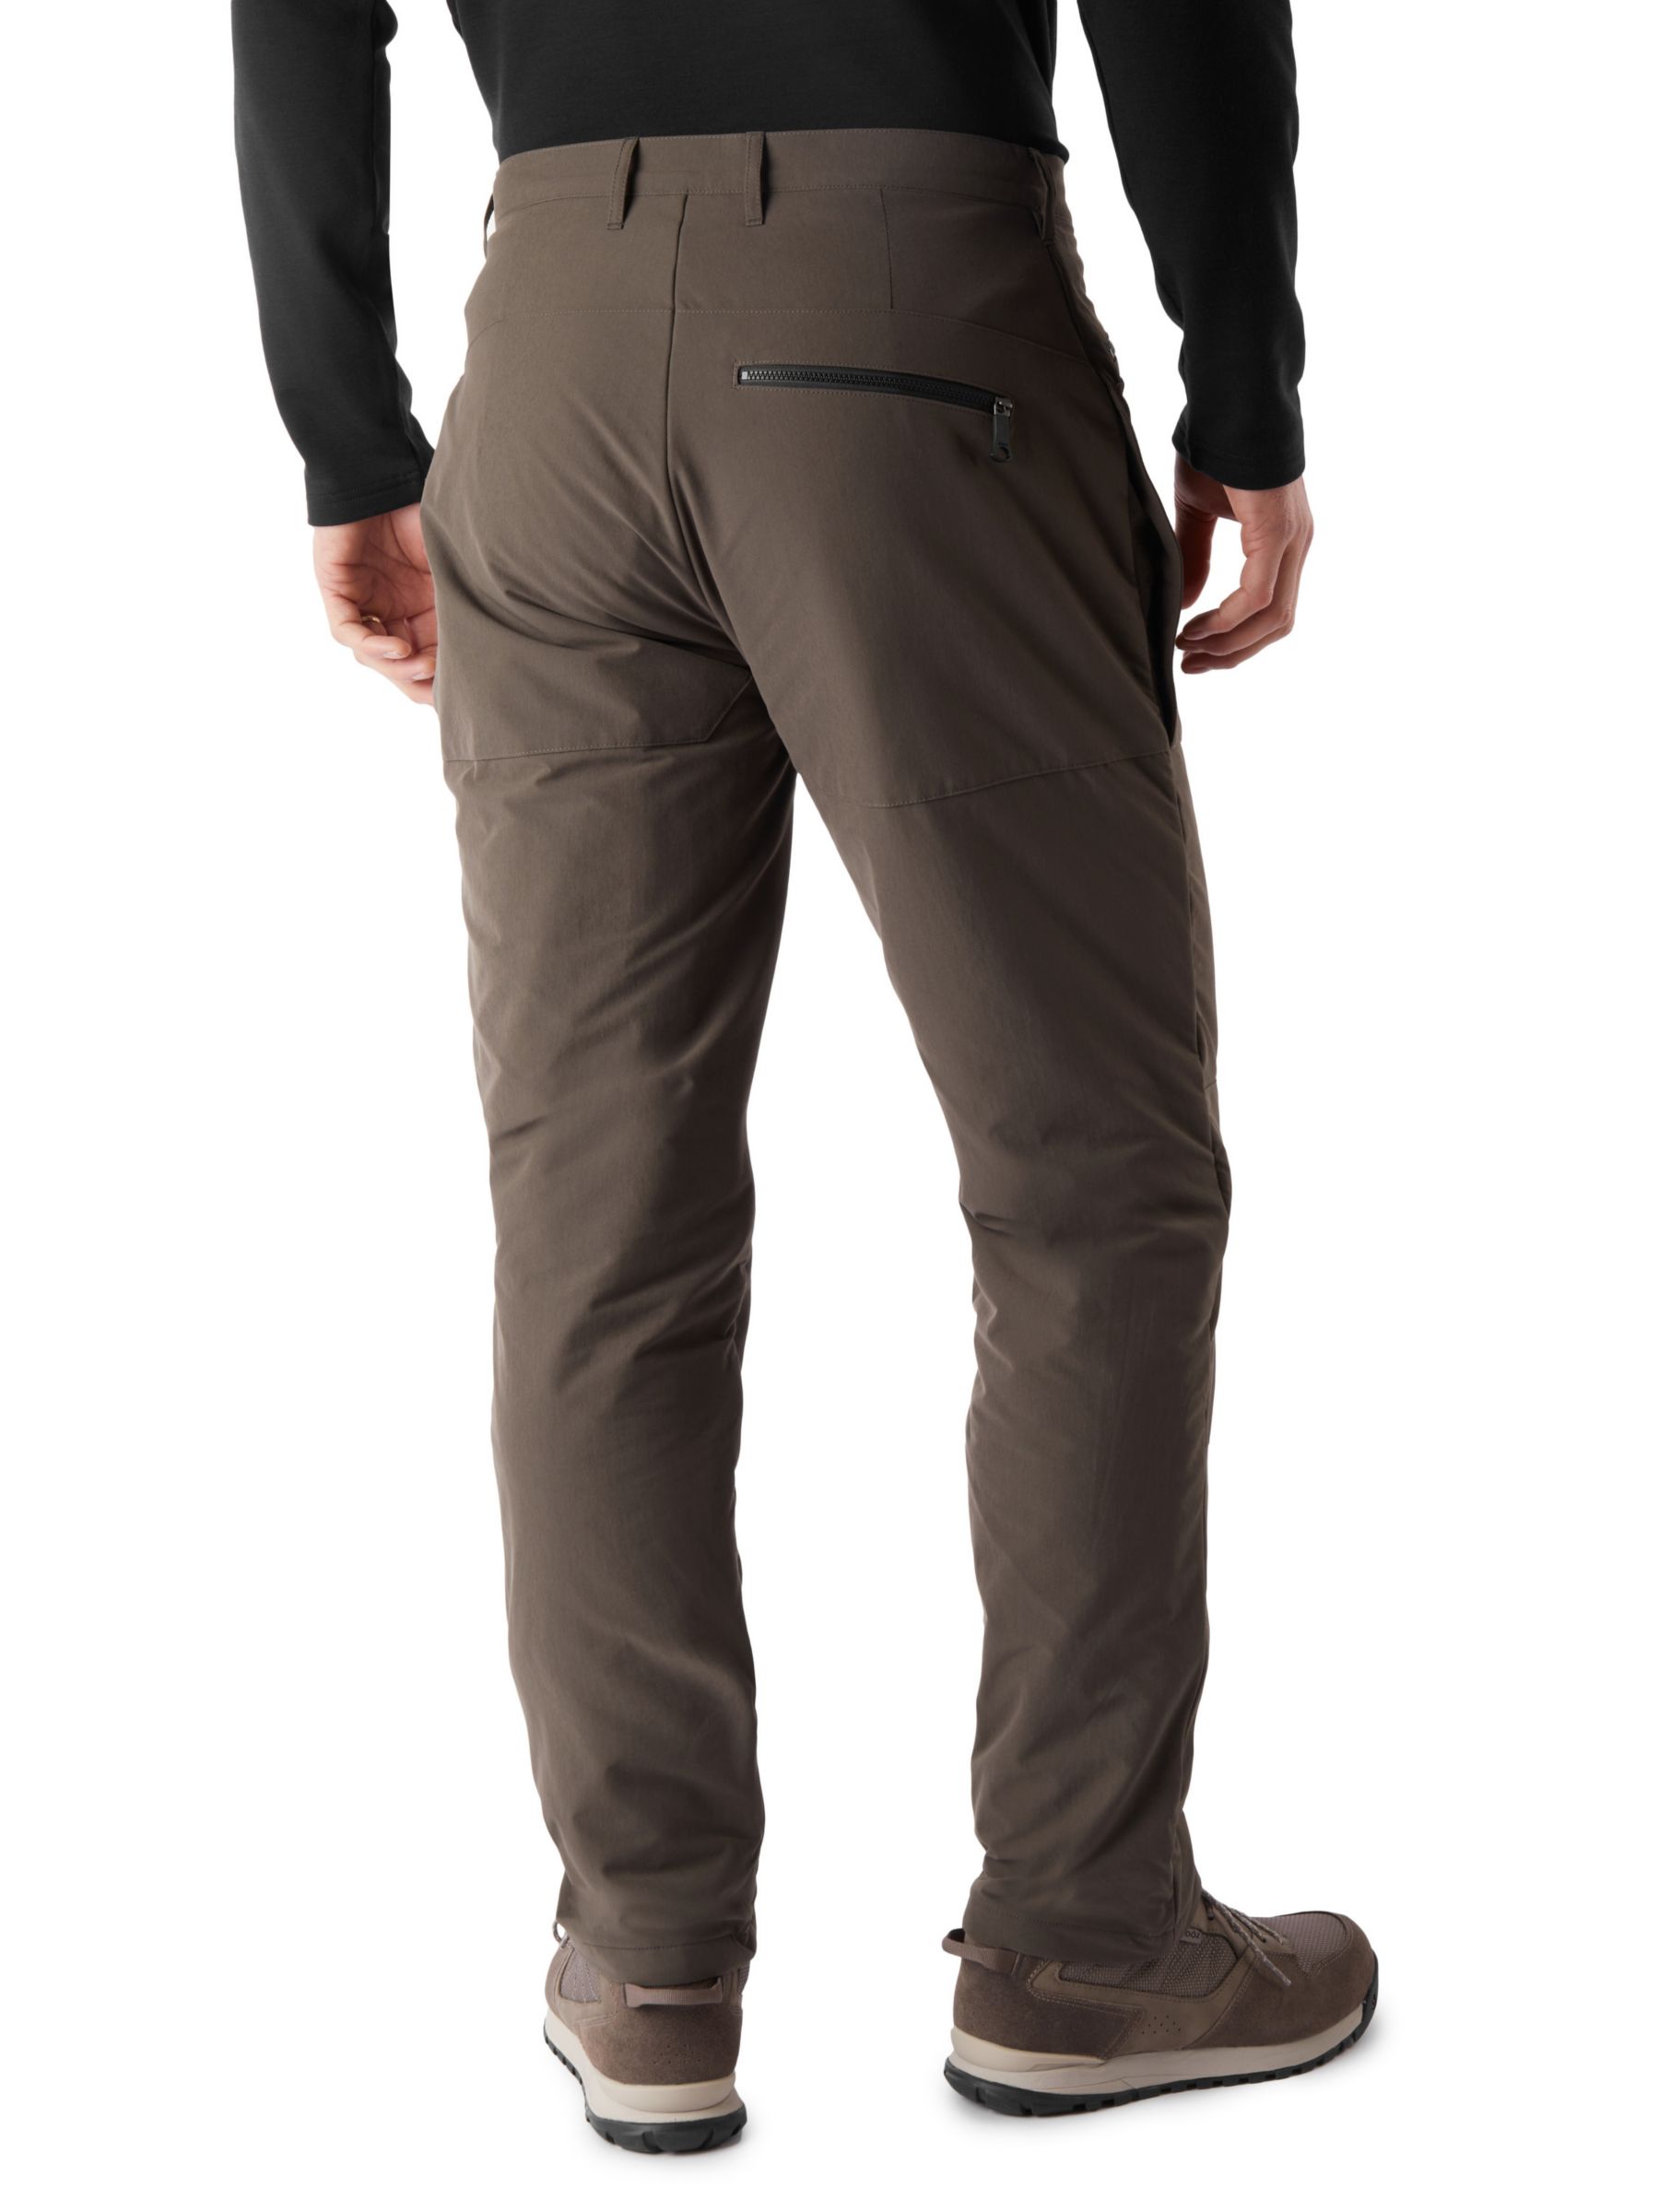 Rohan Winter Stretch Bags Walking Trousers, Dark Olive Brown, 38S